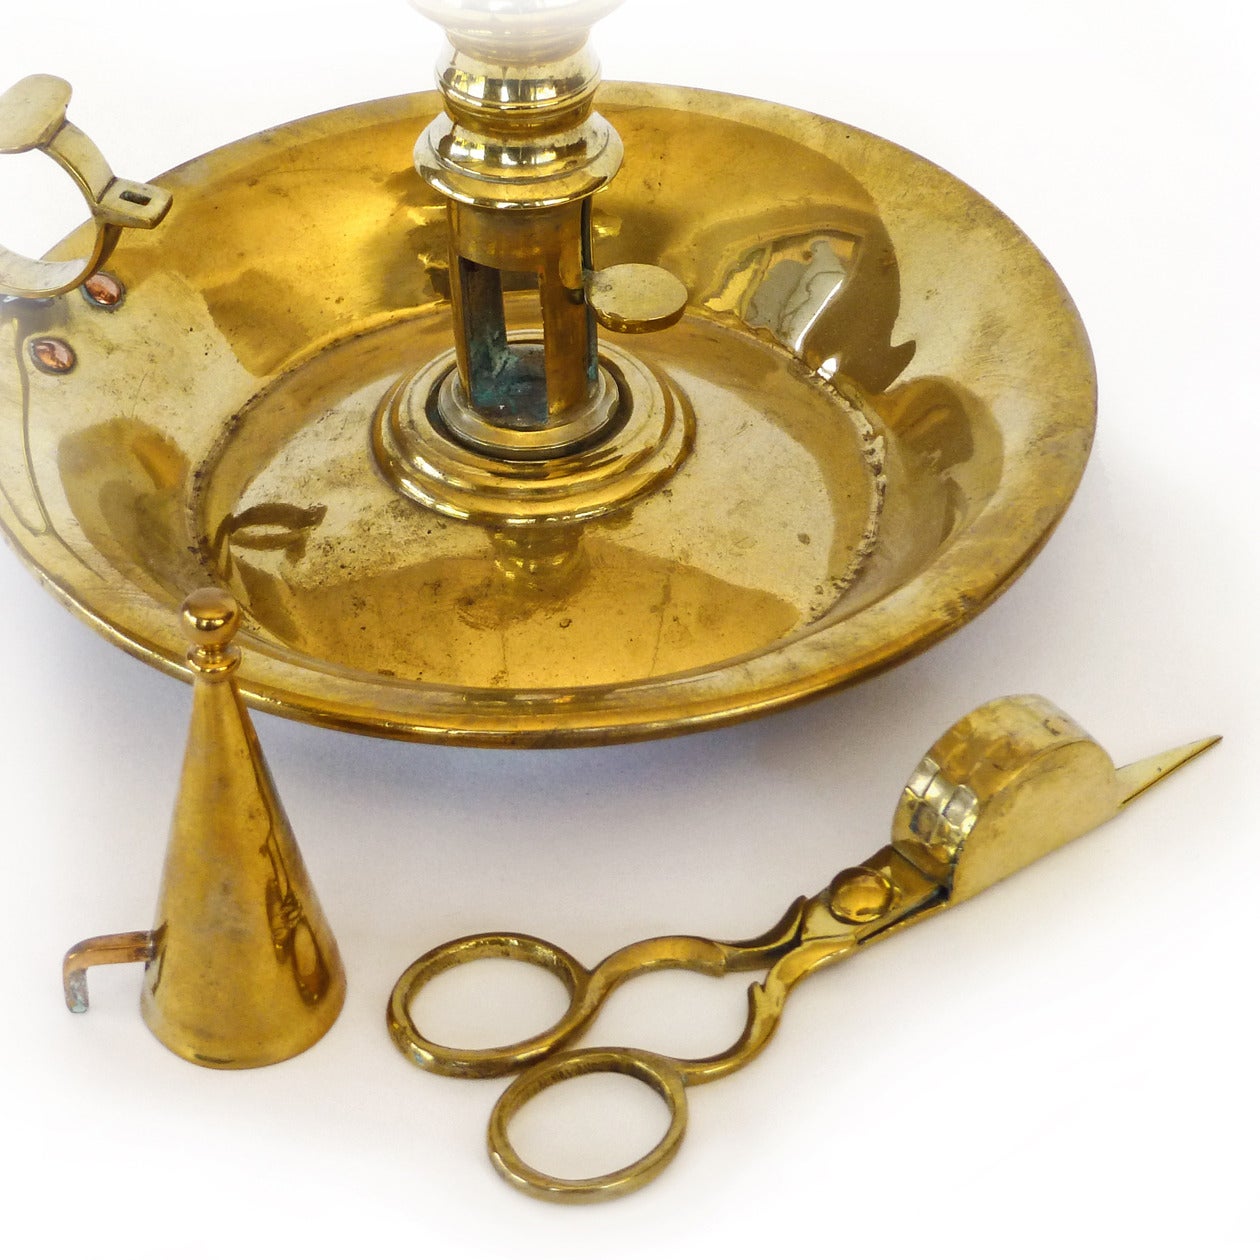 Great Britain (UK) English Brass Deep Dish Chamberstick with Snuffer and Douter, circa 1820